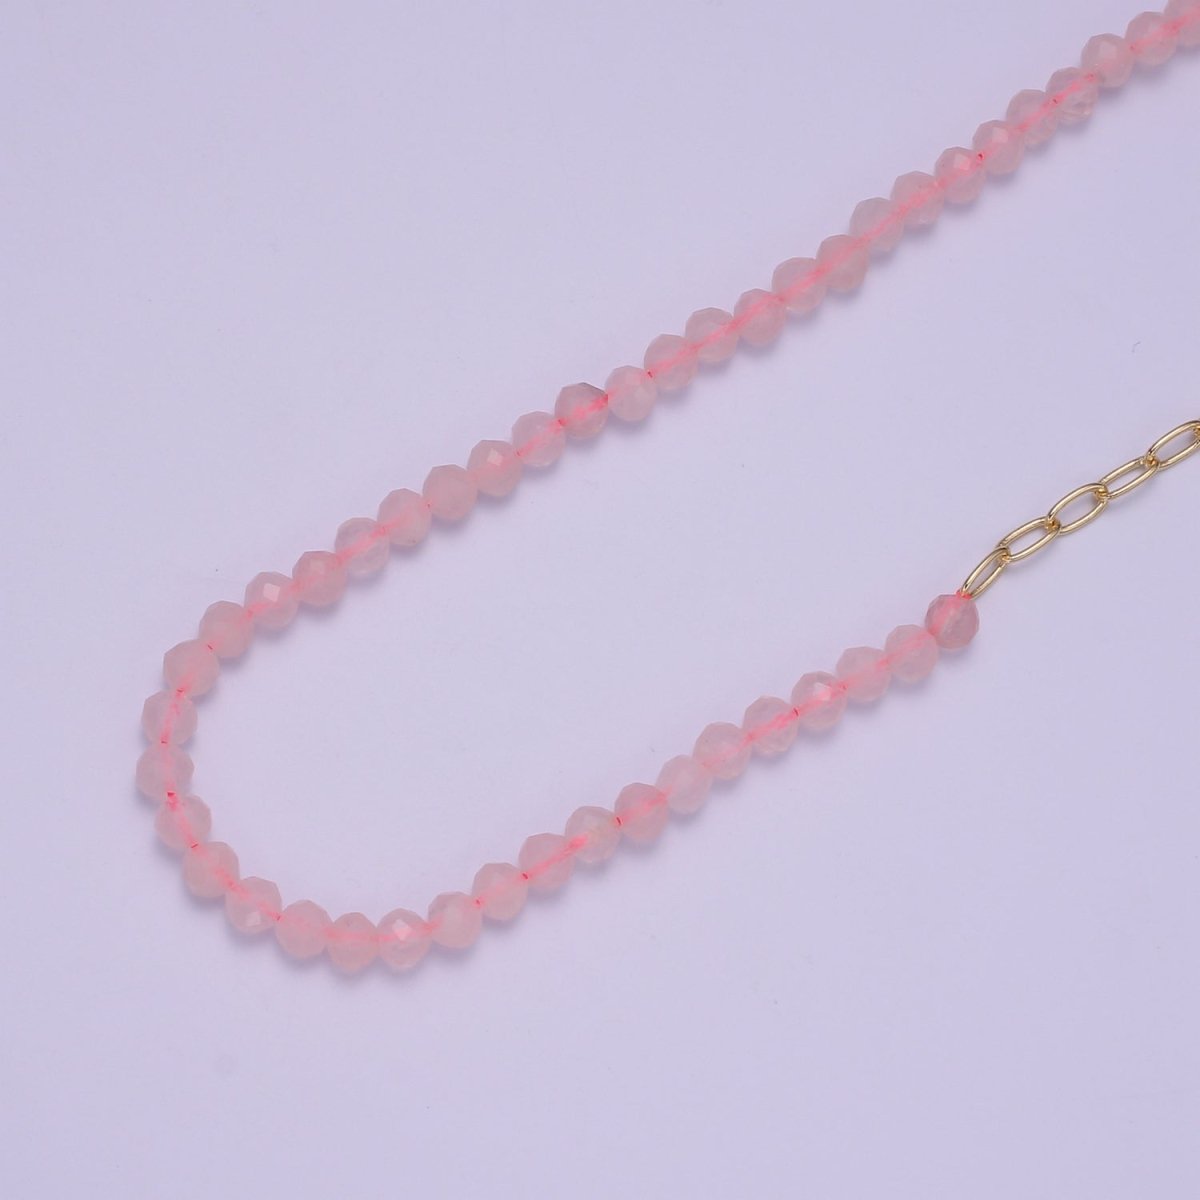 Half 14K Gold Filled Cable Link Chain, Half Dainty Pink Quartz Natural Gemstone Necklace | WA-029 Clearance Pricing - DLUXCA